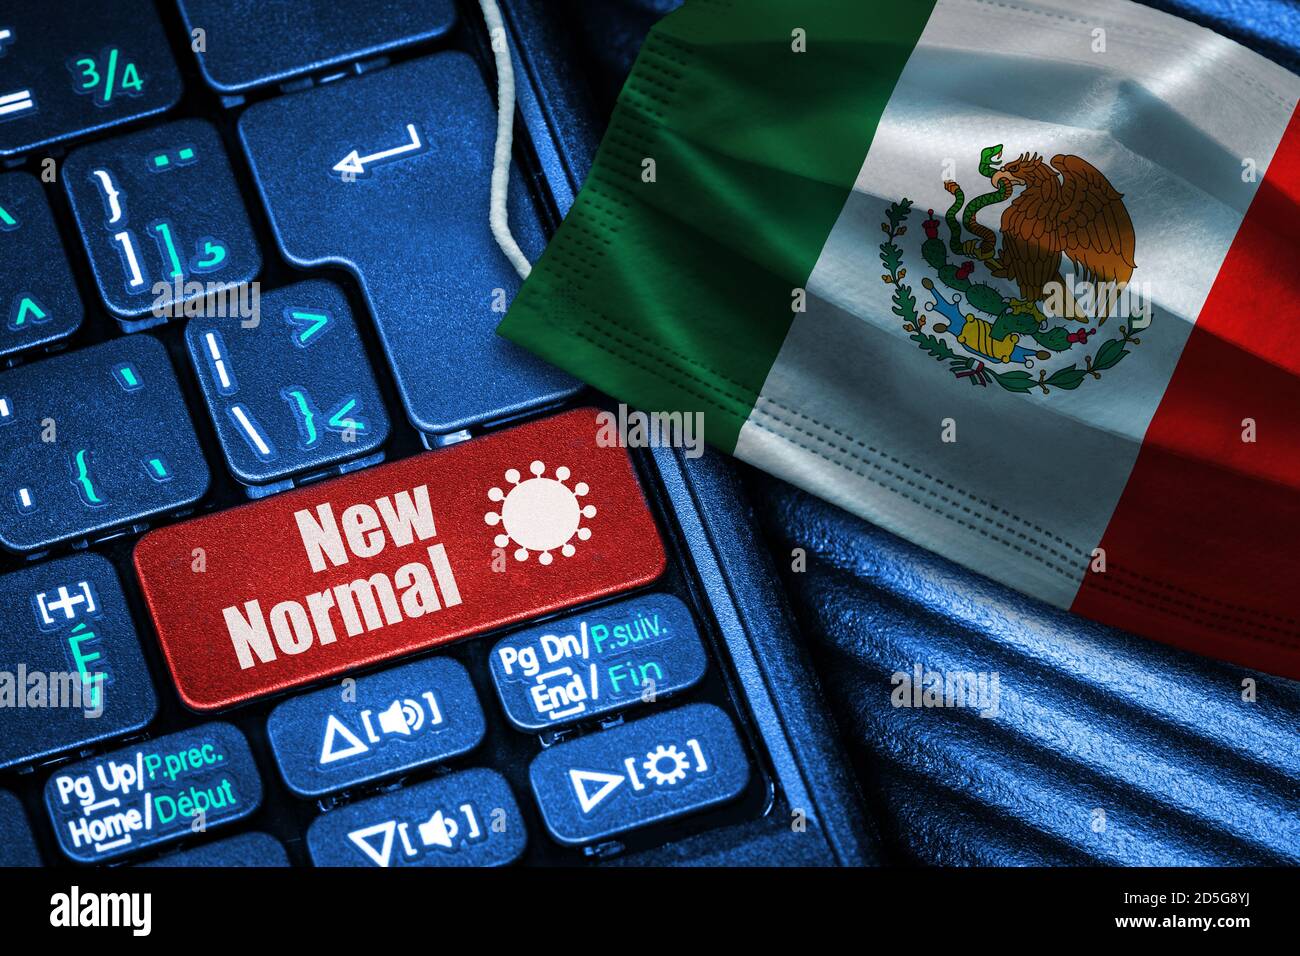 Concept of New Normal in Mexico during Covid-19 with computer keyboard red button text and face mask showing Mexican Flag. Stock Photo